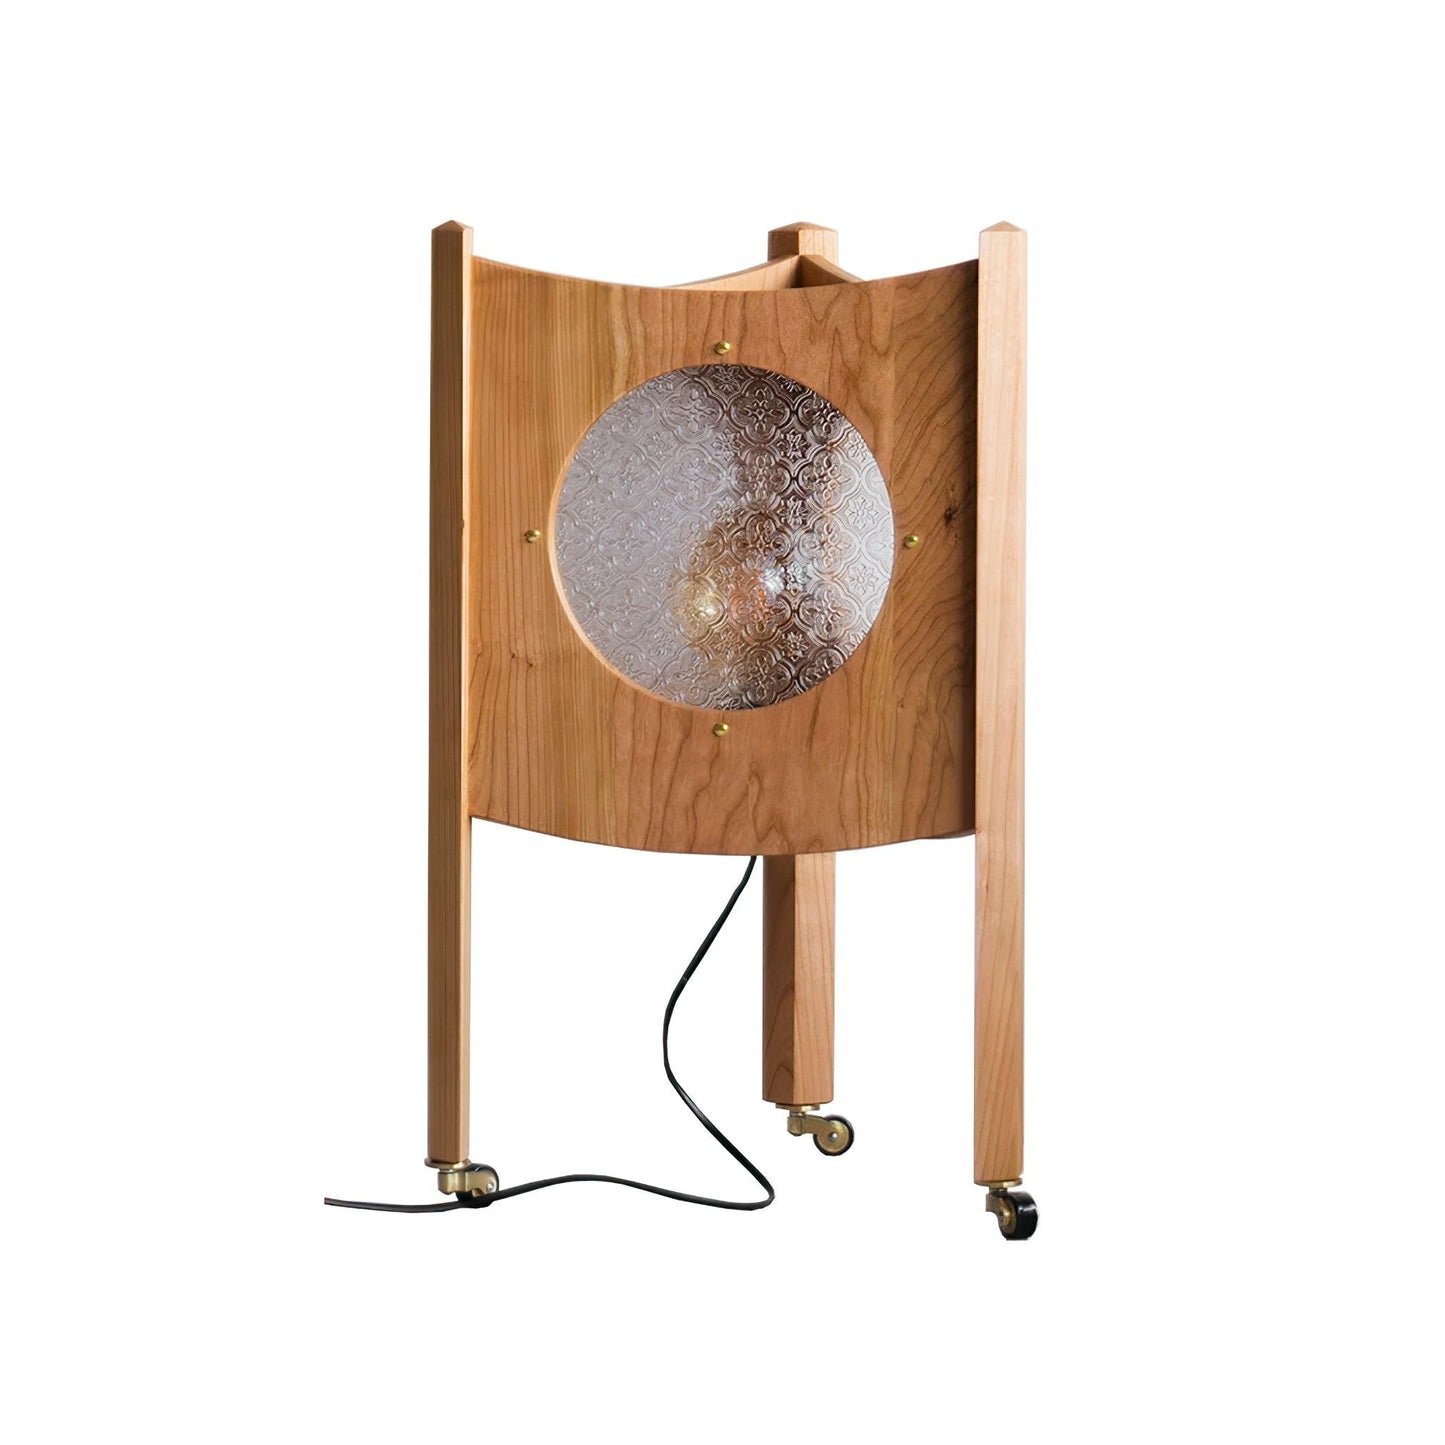 Orbis Mobile Table Lamp